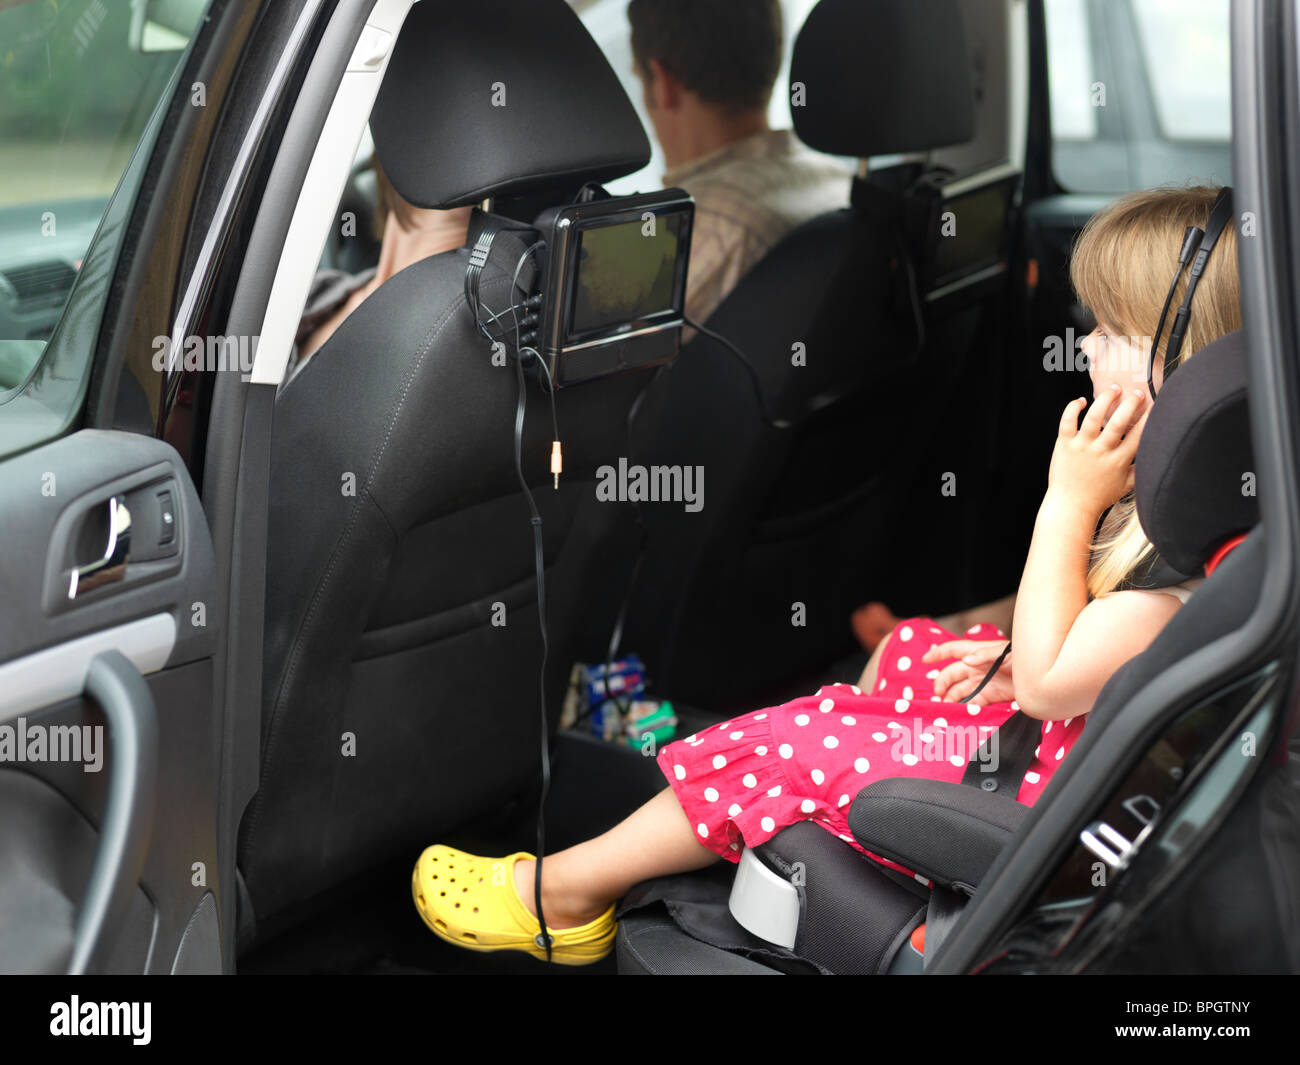 Girl In Childs Car Seat In The Back Of Car Watching a DVD England Stock Photo